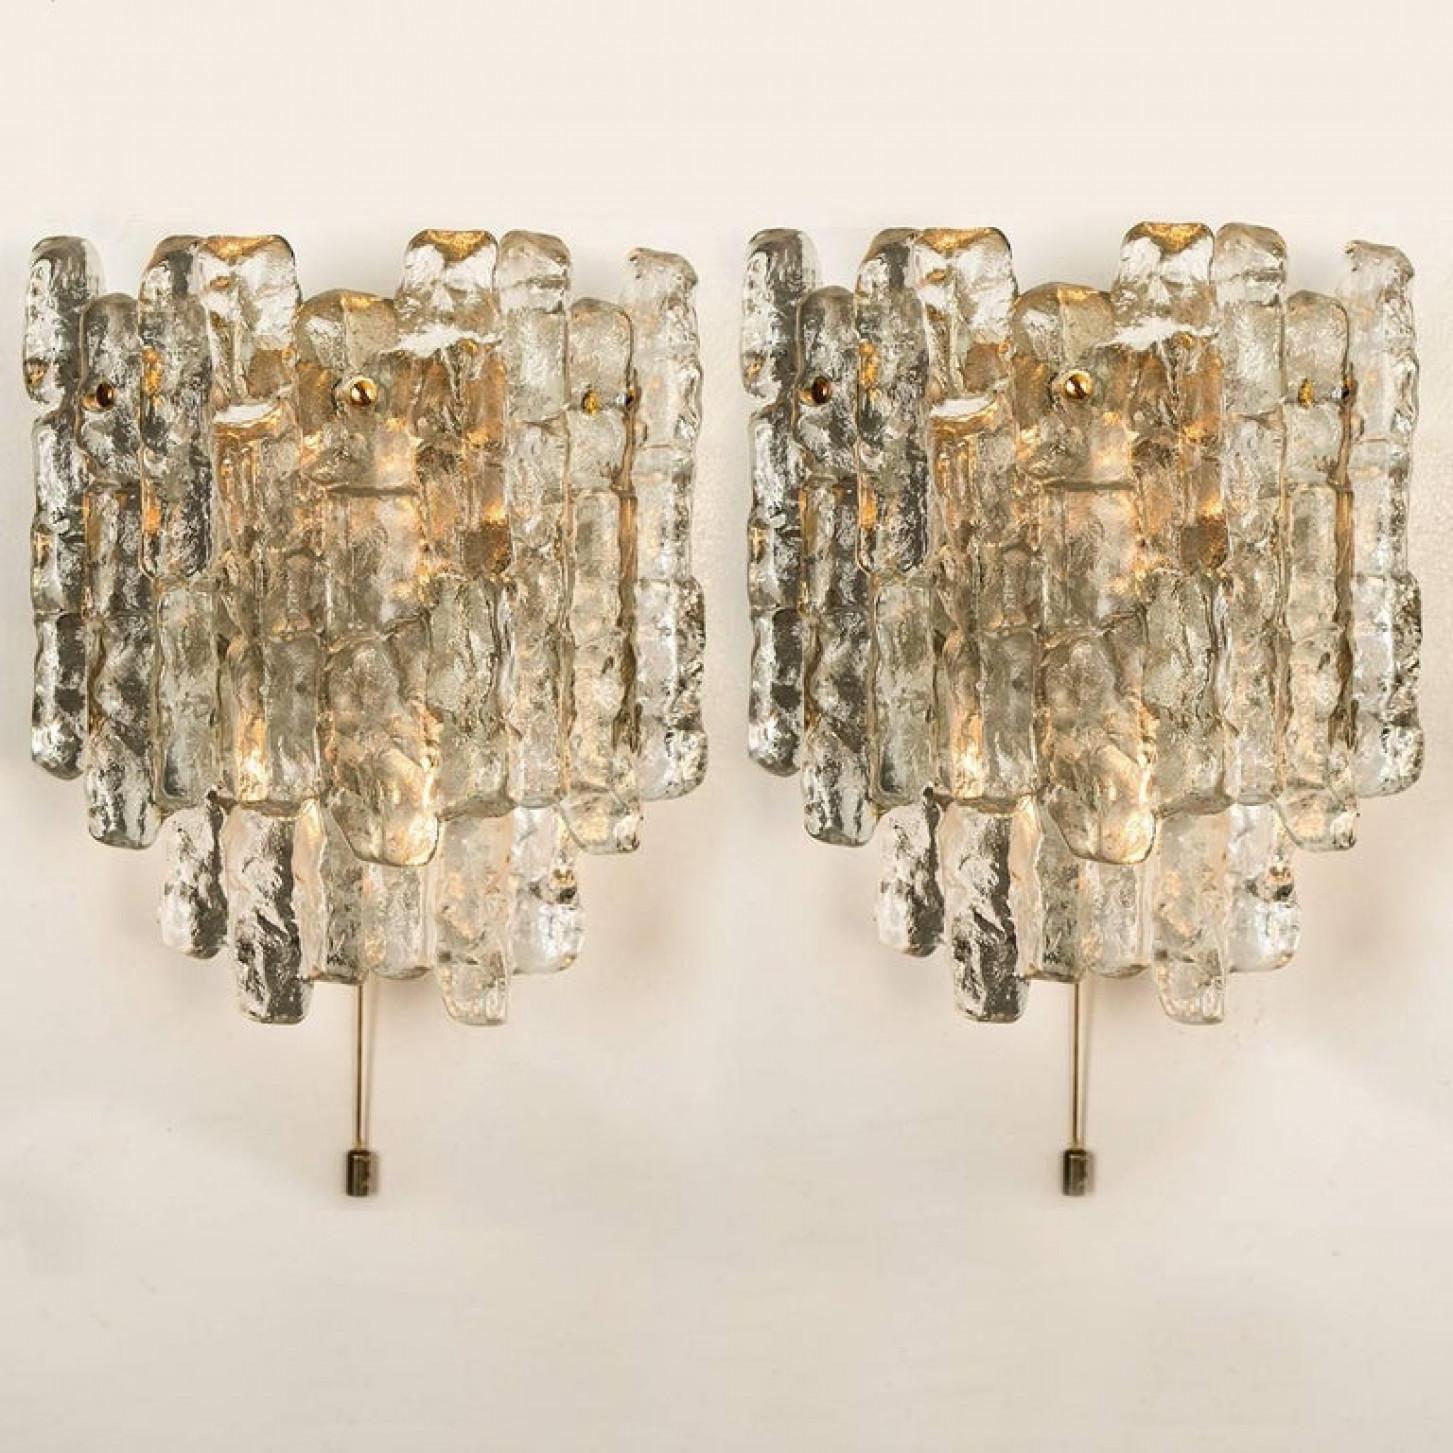 Beautiful and elegant modern brass wall lights or sconces, manufactured by J.T. Kalmar Austria in the 1970s. Lovely design, executed to a very high standard. Each wall light has five solid ice glass sheets dangling on it. Clean lines to complement